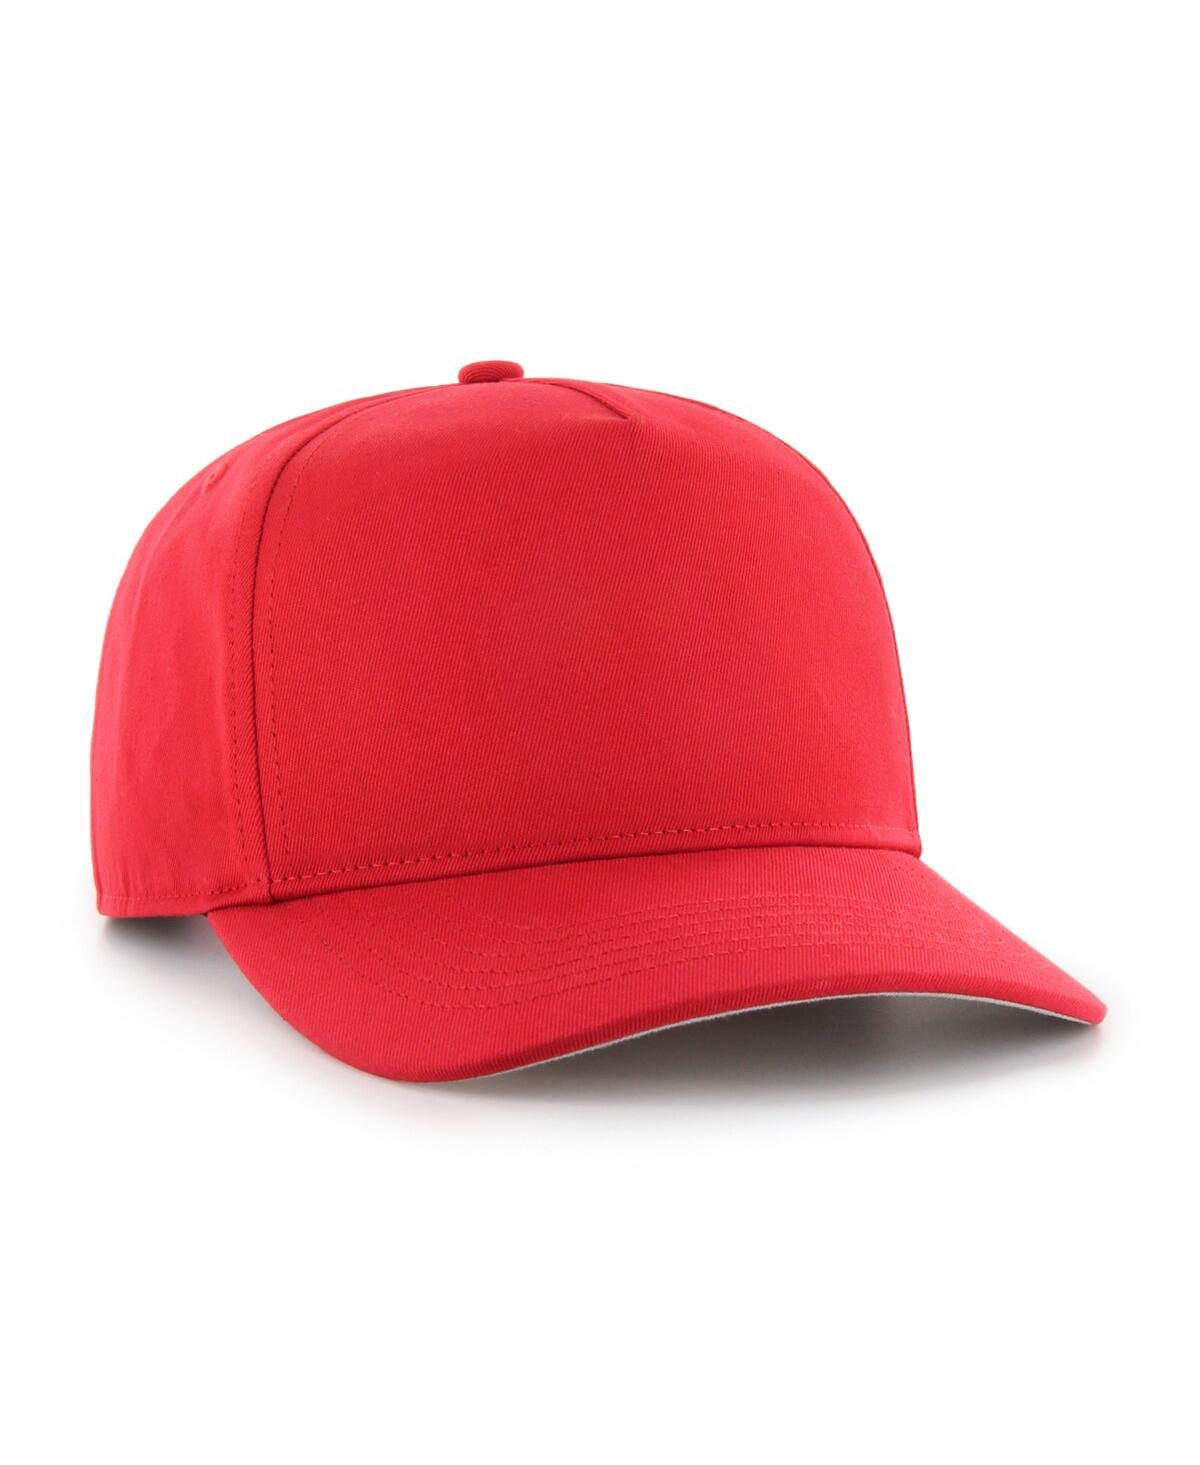 47 Men's Red Hitch Adjustable Hat - Red